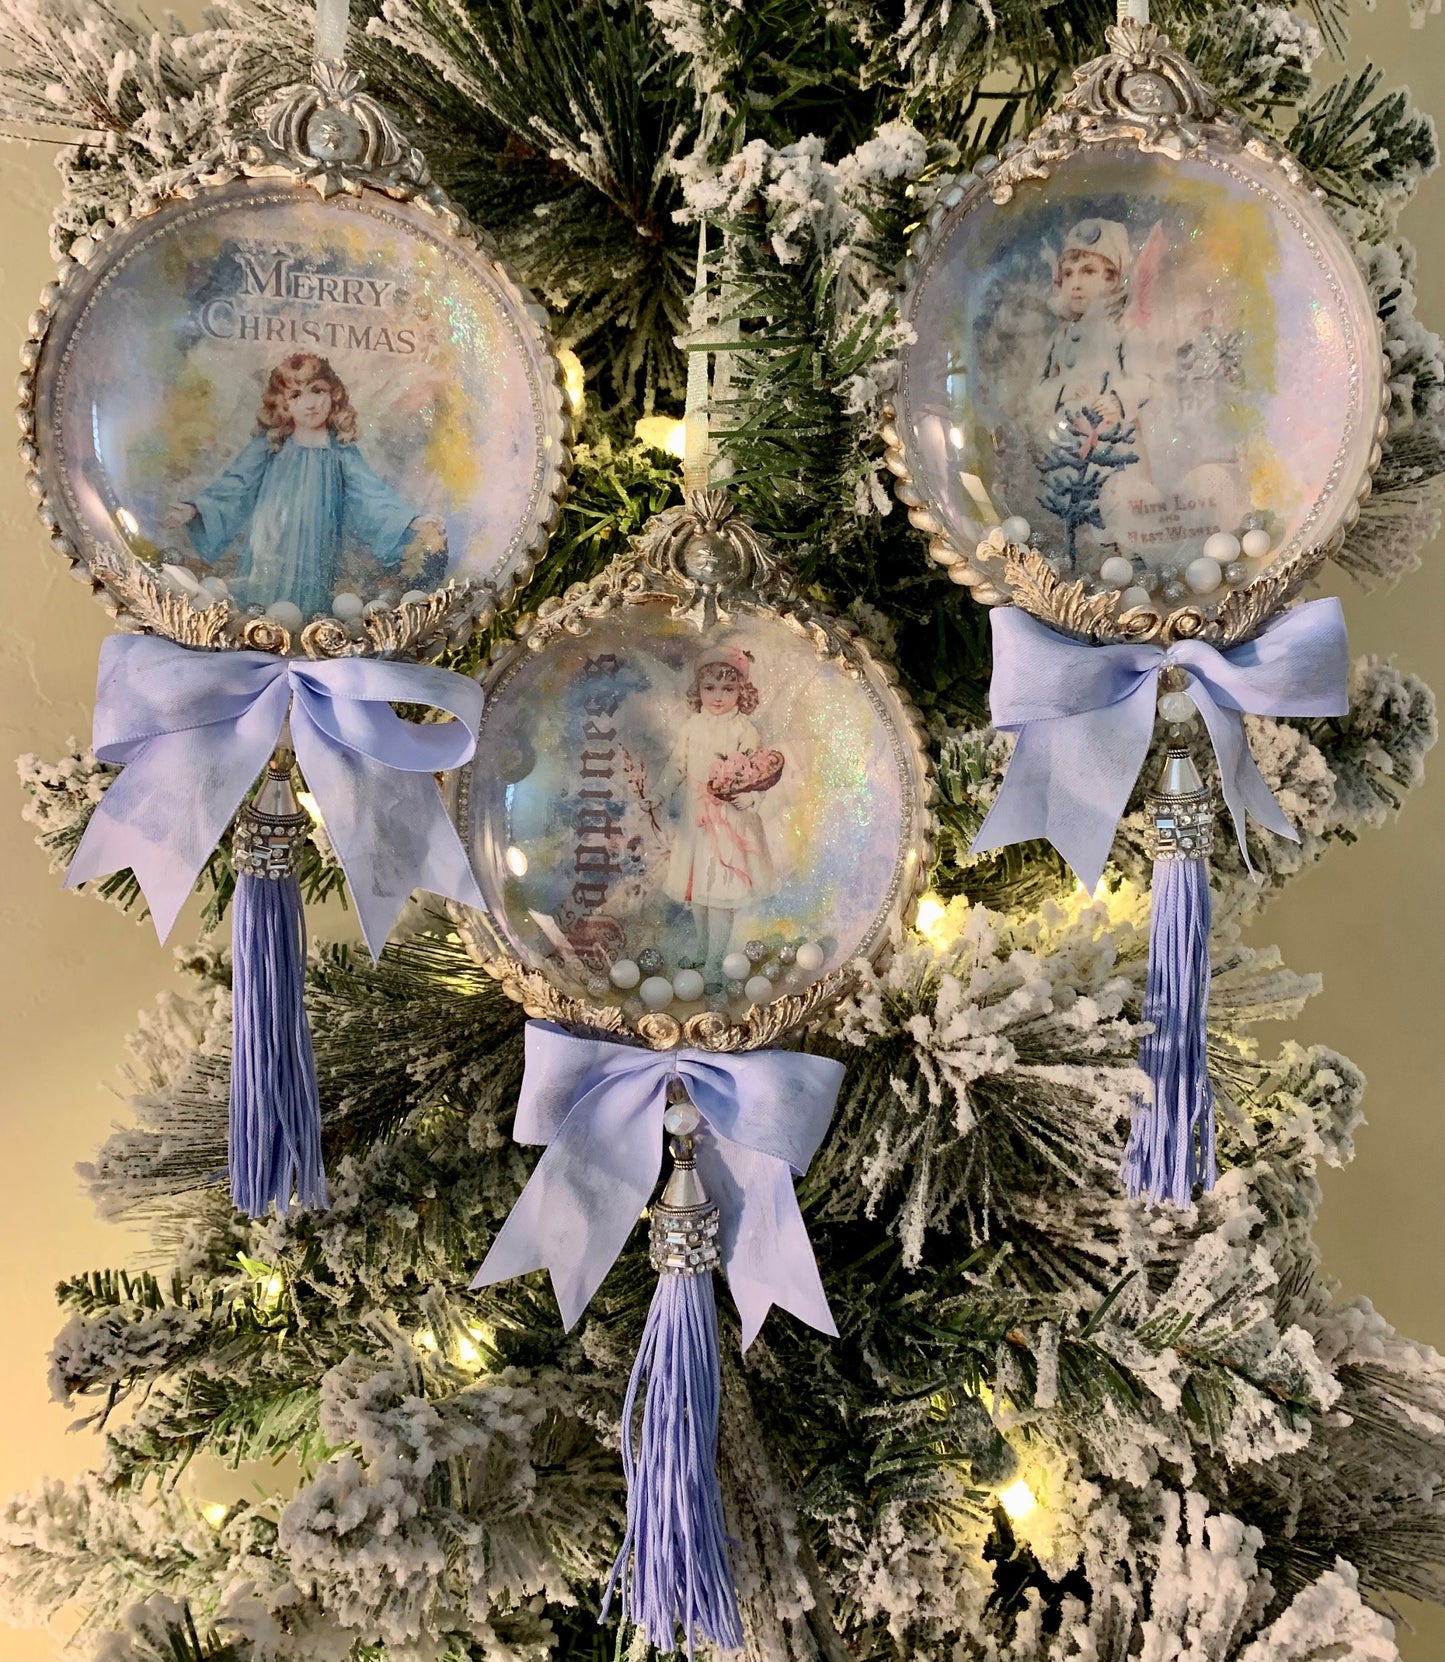 AB Studio Christmas Vintage Children Angels 0360 Shabby Chic Size: A4 - 8.27 X 11.69 inches Rice Paper for Decoupage Imported from Poland